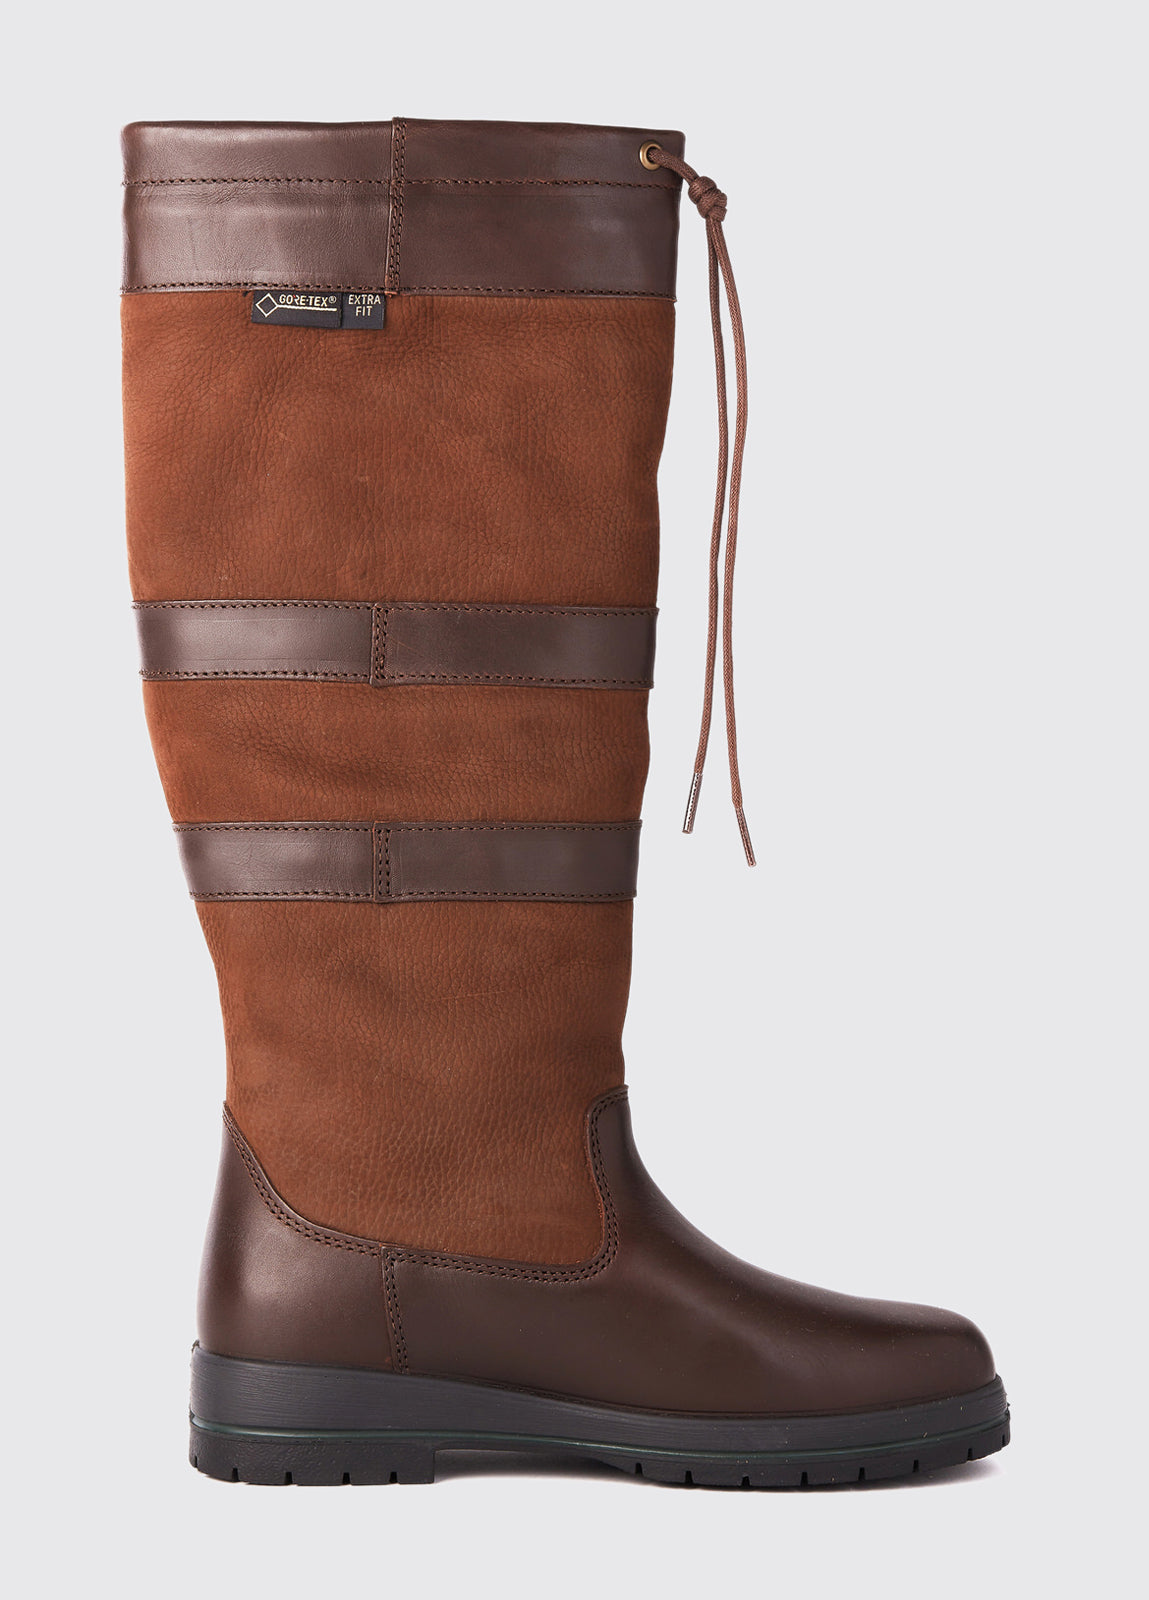 Dubarry Womens Galway Extrafit Country Boot - Walnut